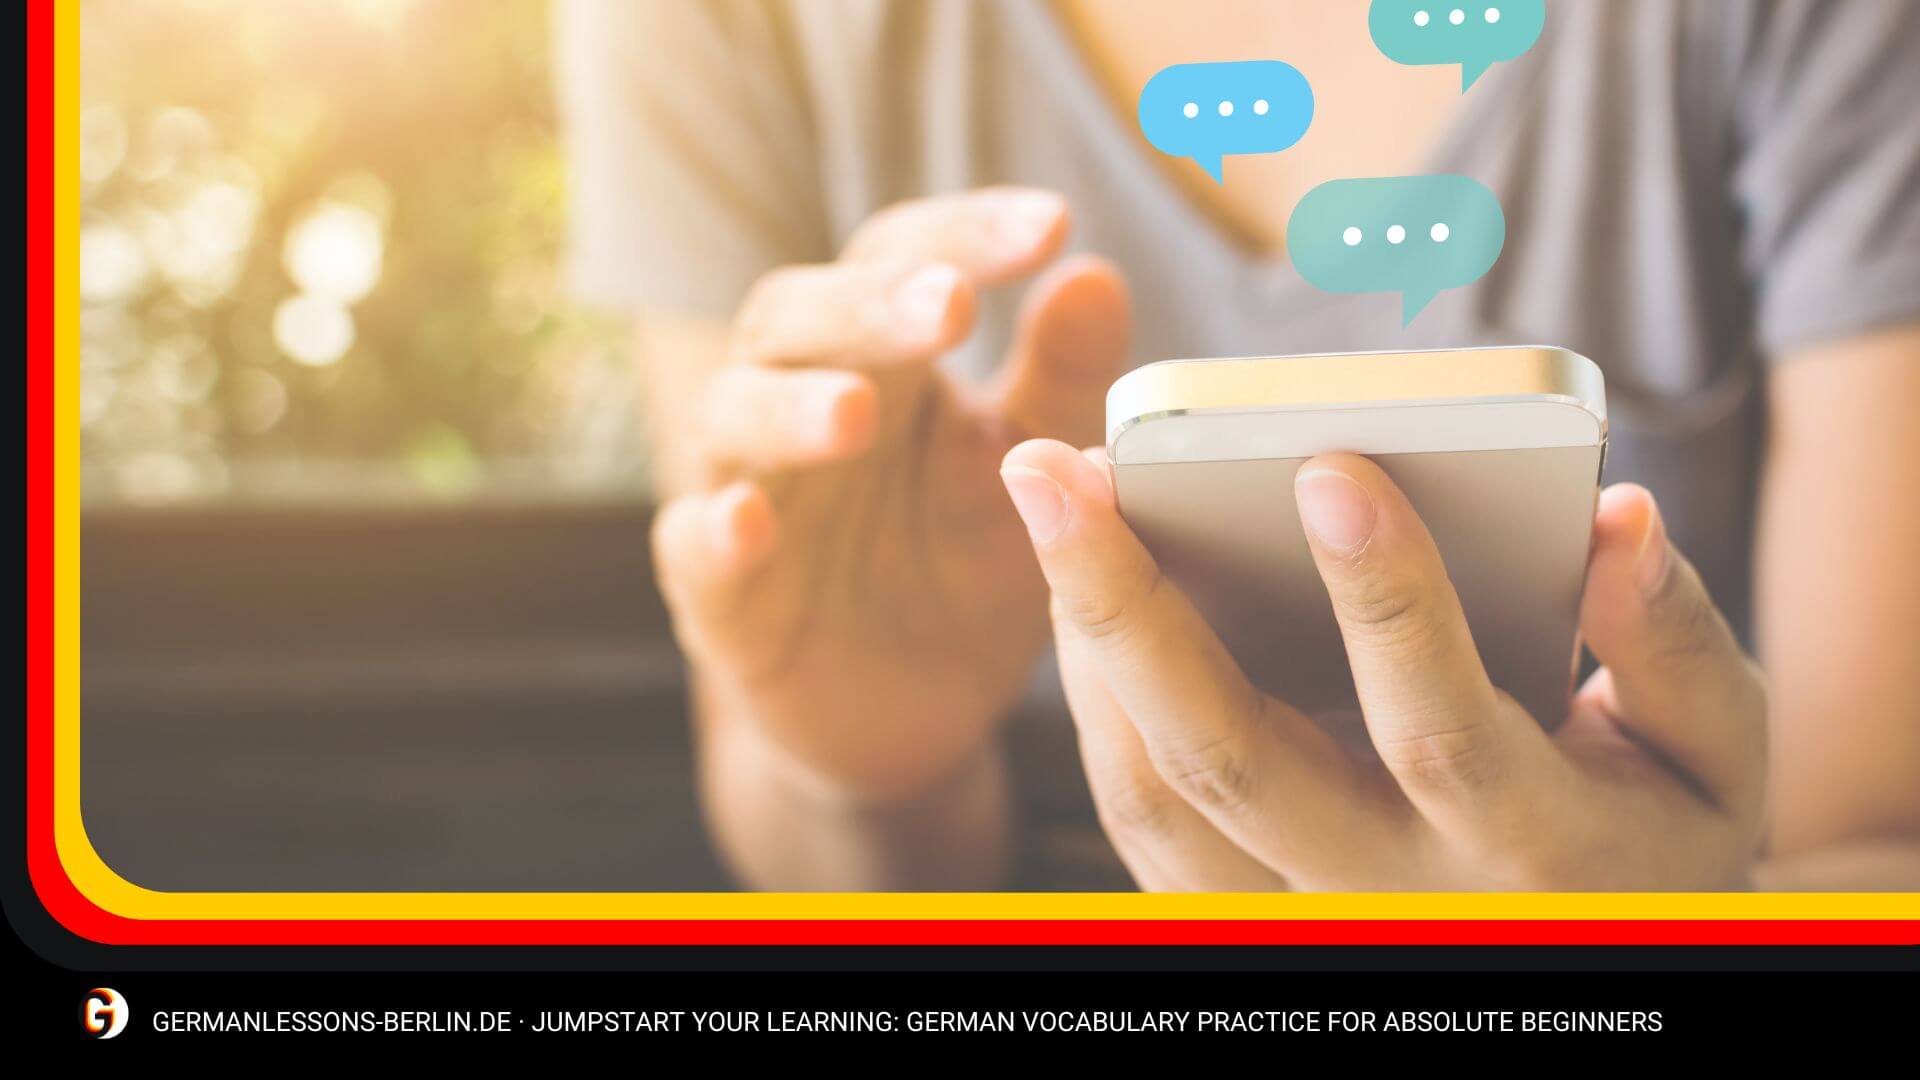 Jumpstart Your Learning: German Vocabulary Practice for Absolute Beginners